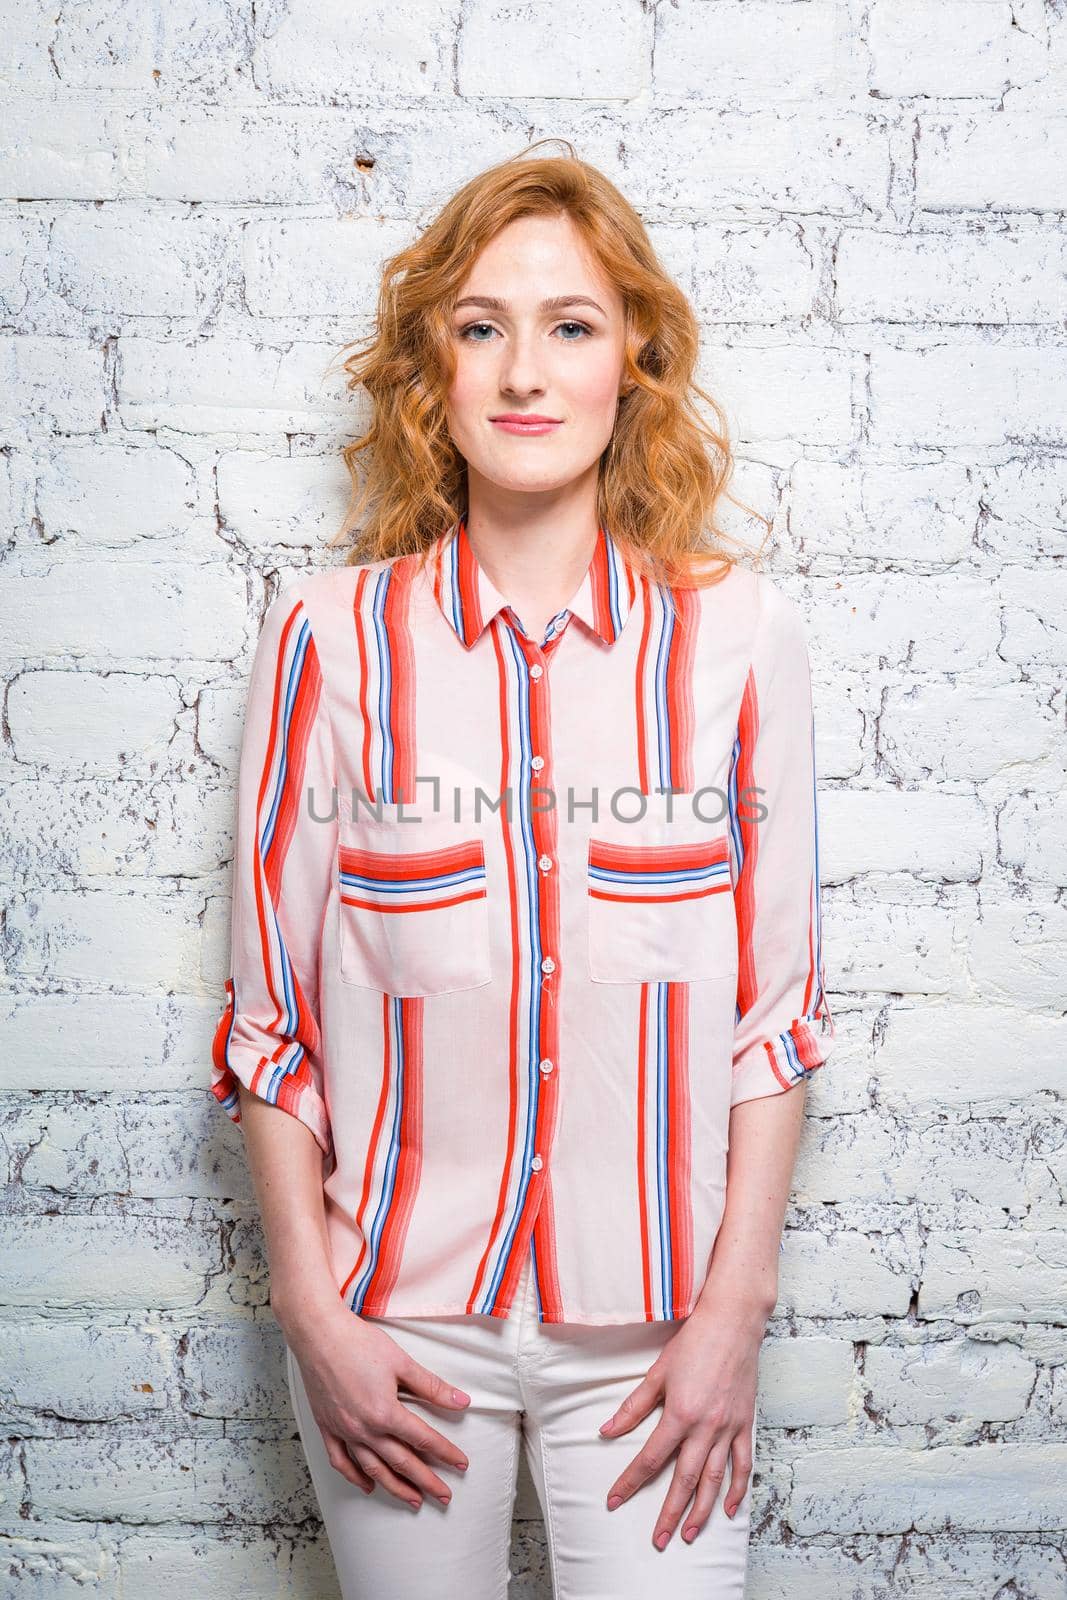 A beautiful young woman student with red curly hair and freckles is leaning against a brick wall of gray color. Dressed in a red striped shirt and white pants.